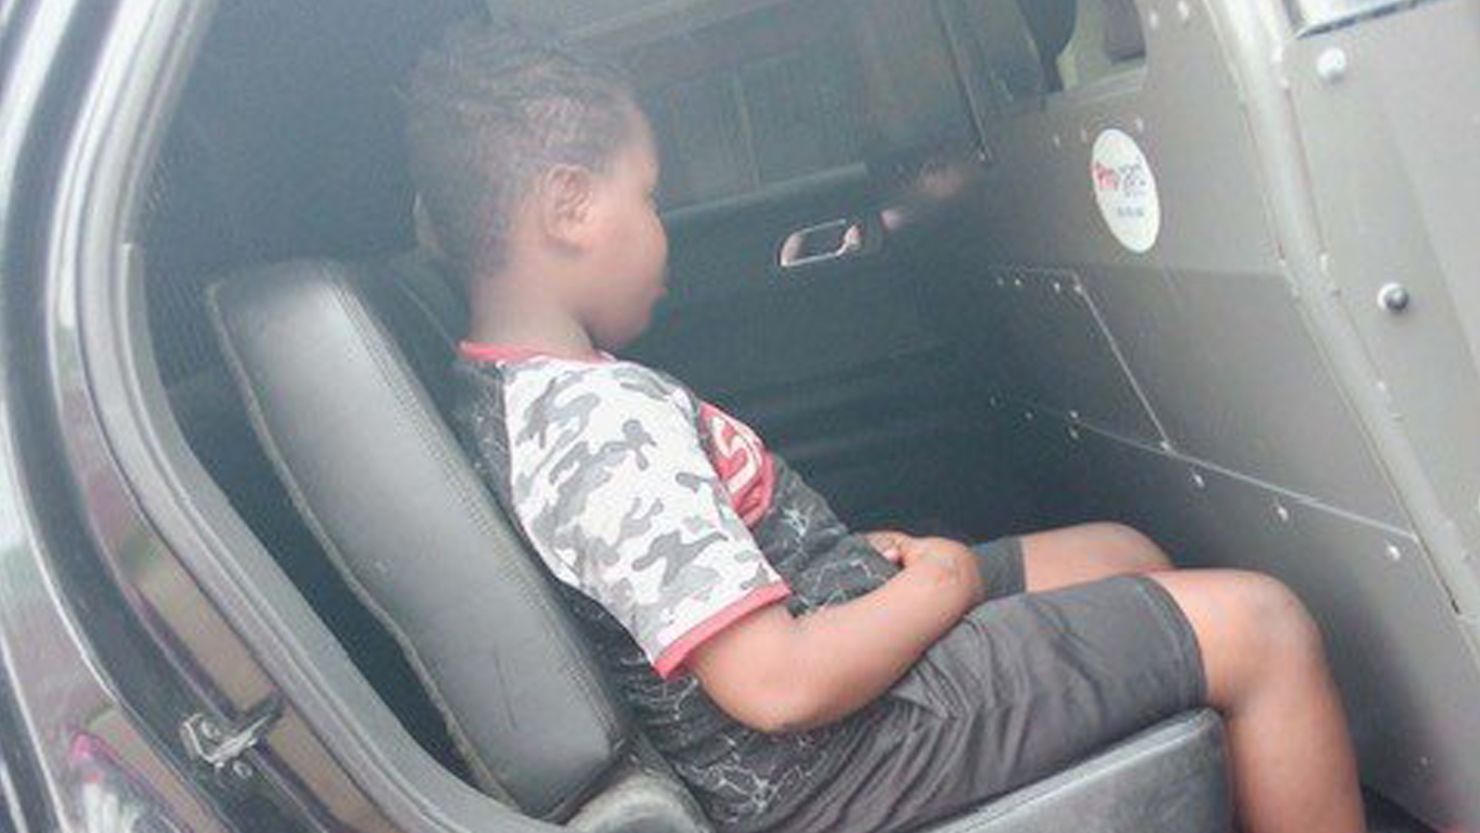 Quantavious Eason, 10, was arrested and taken away by officers with the Senatobia Police Department after his mother says he was caught urinating outdoors.